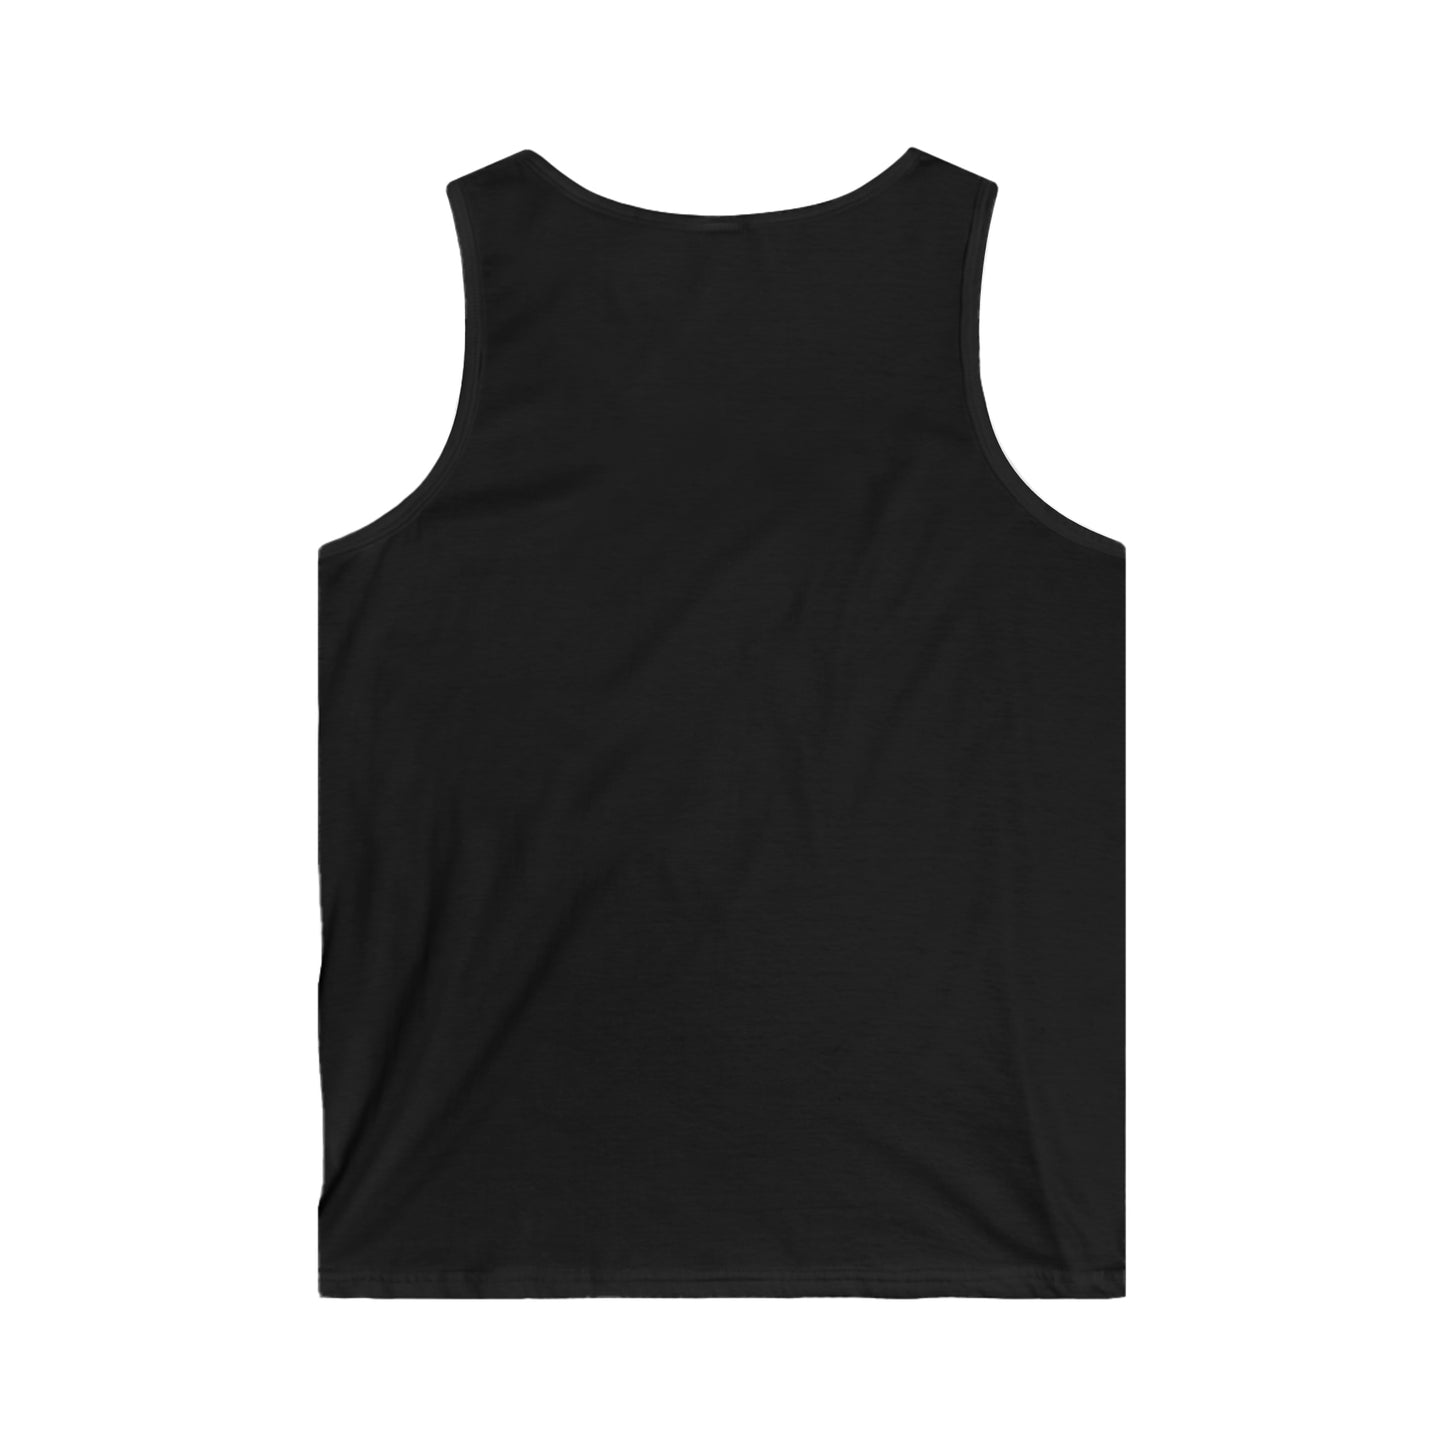 Full Speed Ahead Men's Softstyle Tank Top